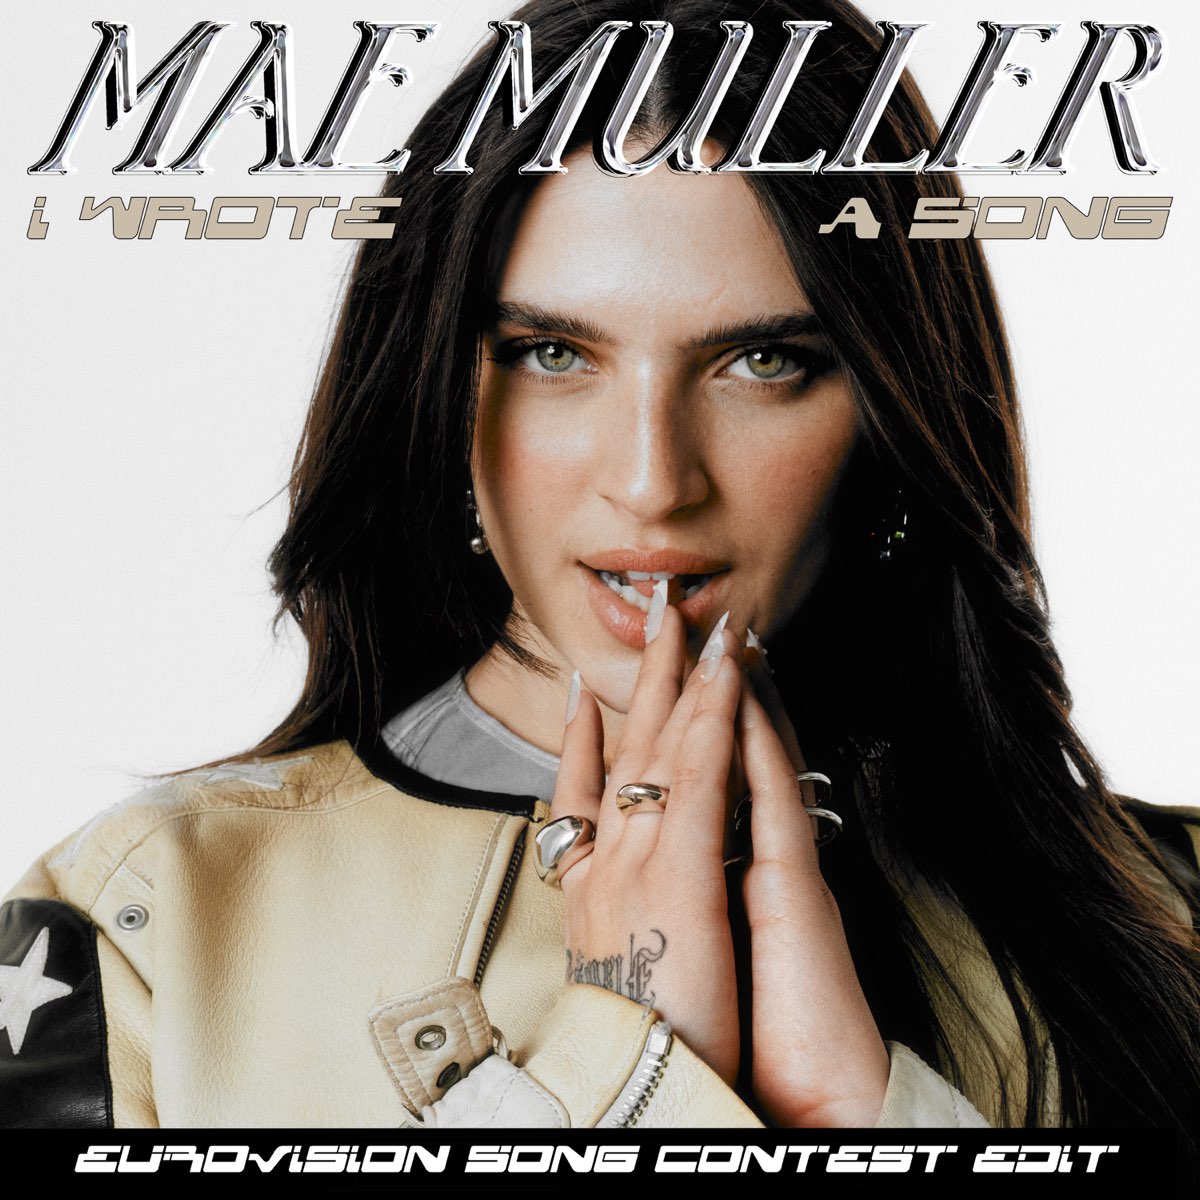 Mae Muller I Wrote A Song (Eurovision Song Contest Edit) cover artwork